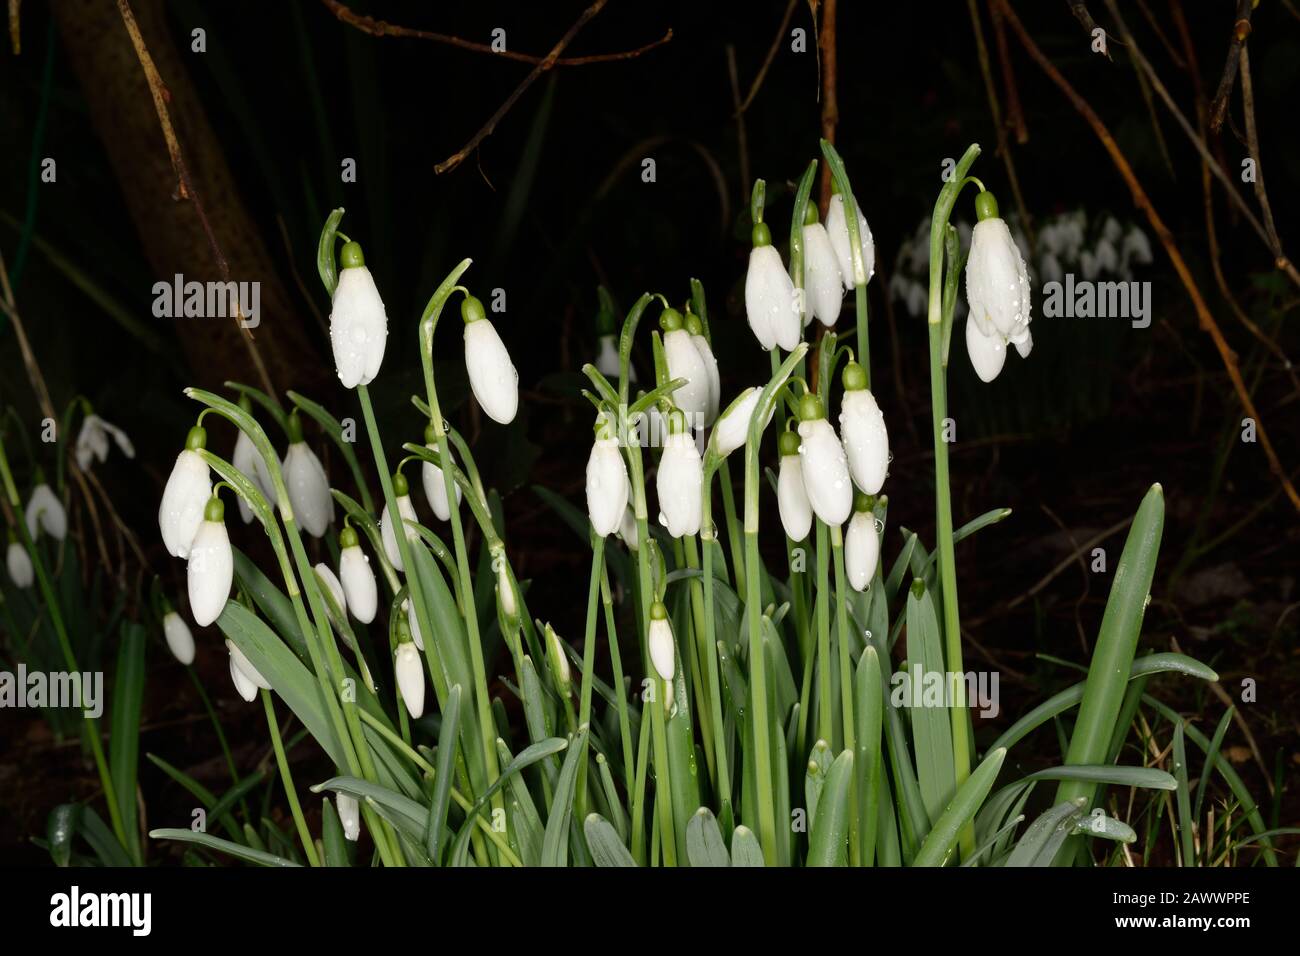 Snowdrops or Galanthus nivalis. Closeup of white bell like flowers. Stock Photo